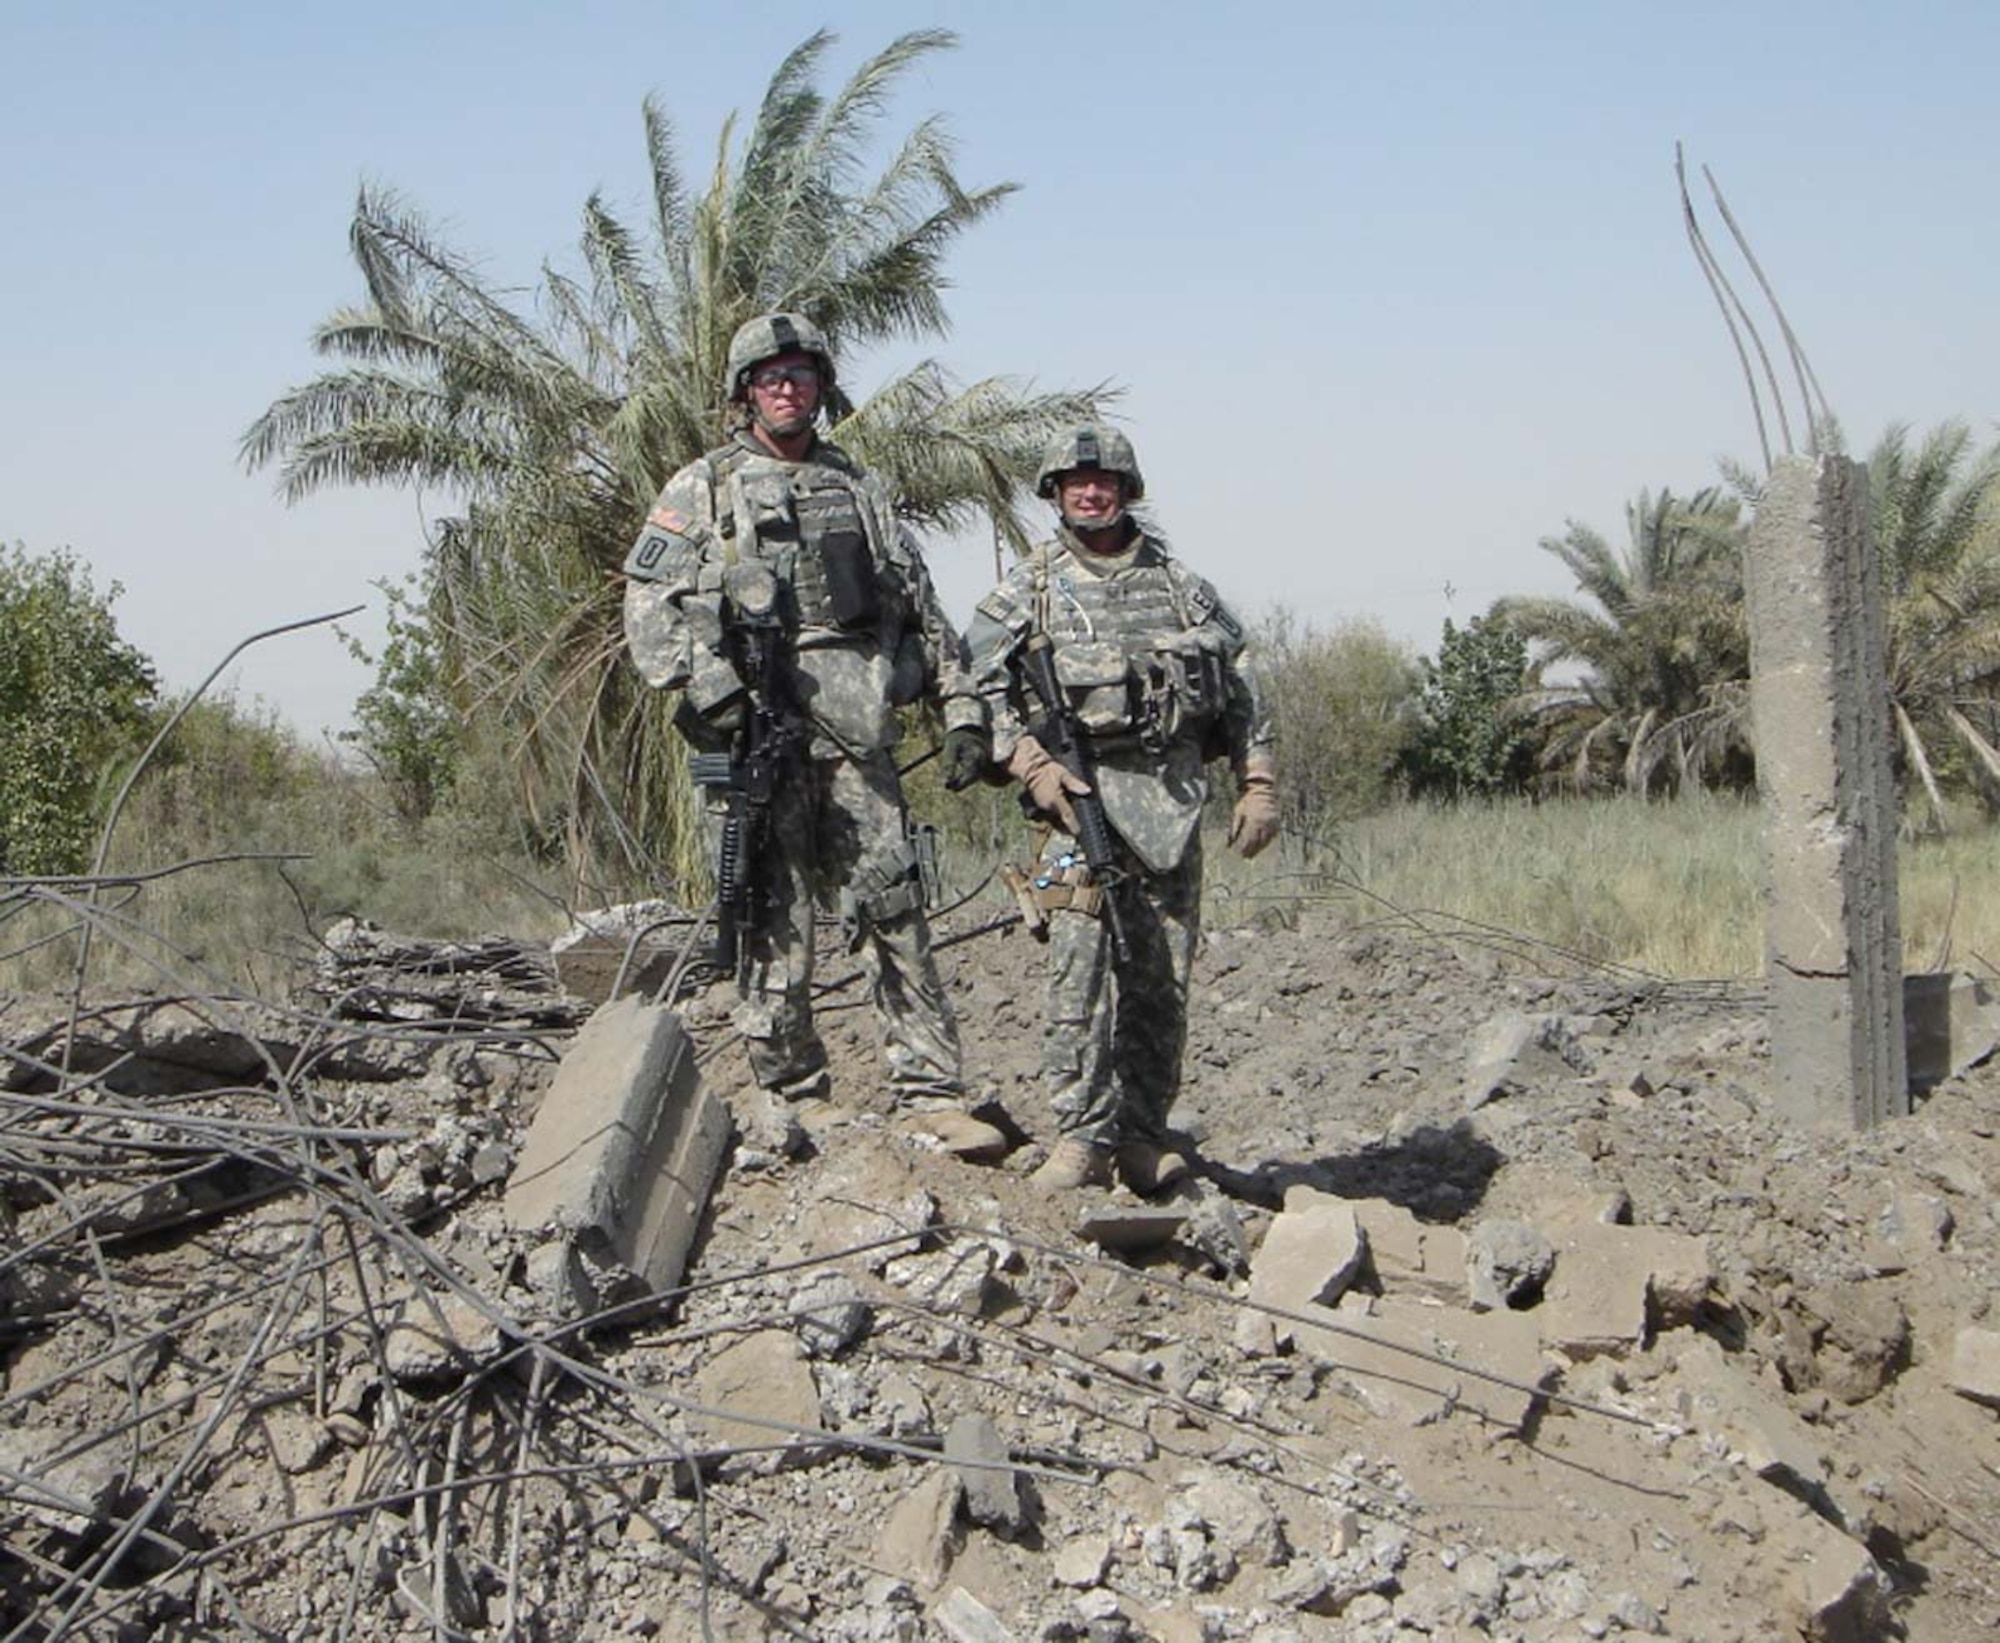 Iraq – Senior Master Sgt. Ken Pettibone and a coworker stand on the remnants of a house that was being used repeatedly for attacks against coalition forces. According to locals, the house had been abandoned for more than 15 years. Sergeant Pettibone was about 500 meters away while the Air Force dropped five each Mk 82 500 lb bombs on the house. Sergeant Pettibone and his team then went in to ensure there were no IED components. He earned his second Bronze Star medal for his work during his second tour in Iraq. (Courtesy photo)